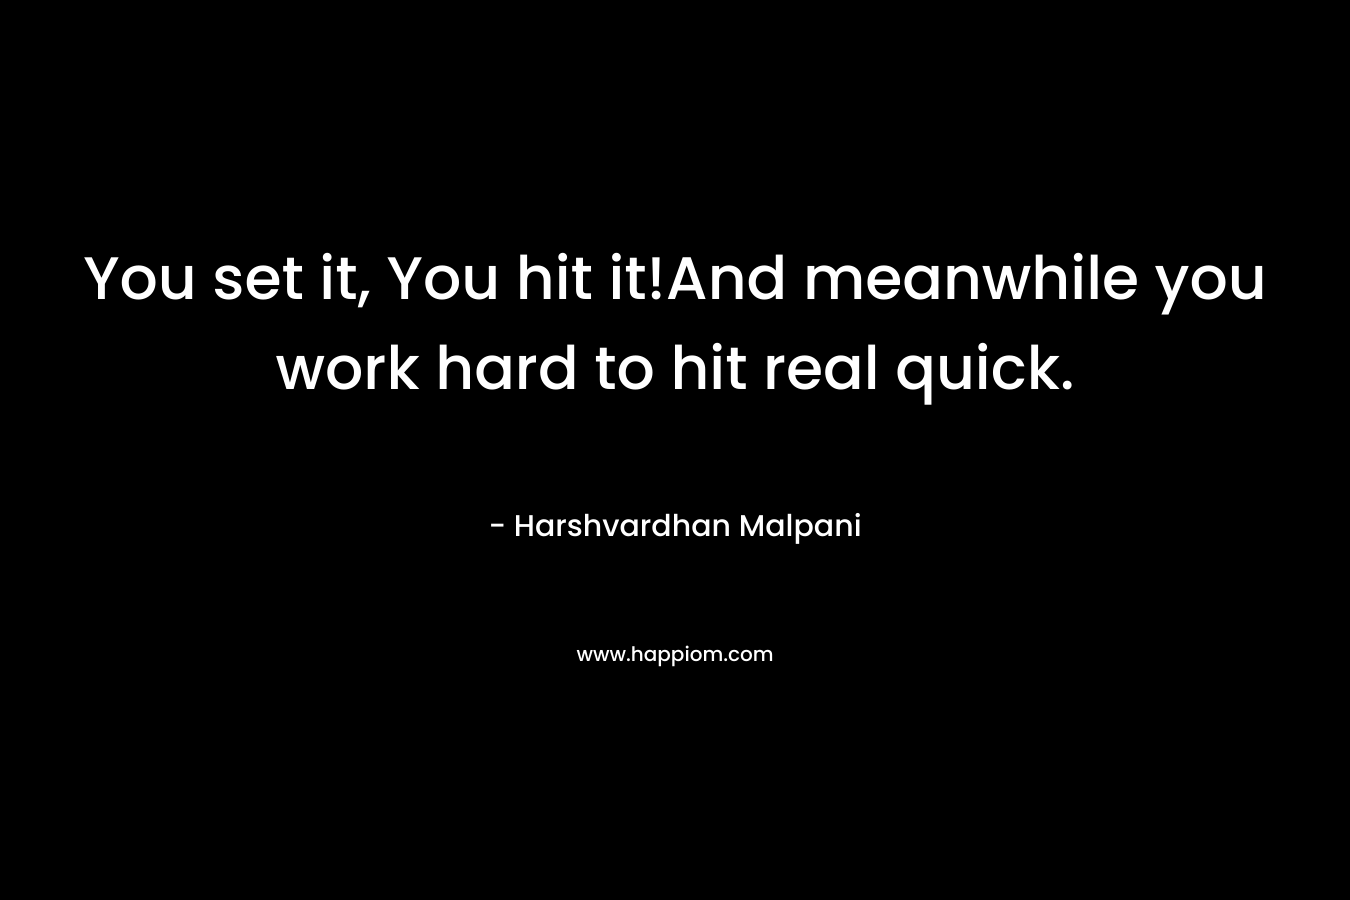 You set it, You hit it!And meanwhile you work hard to hit real quick. – Harshvardhan Malpani